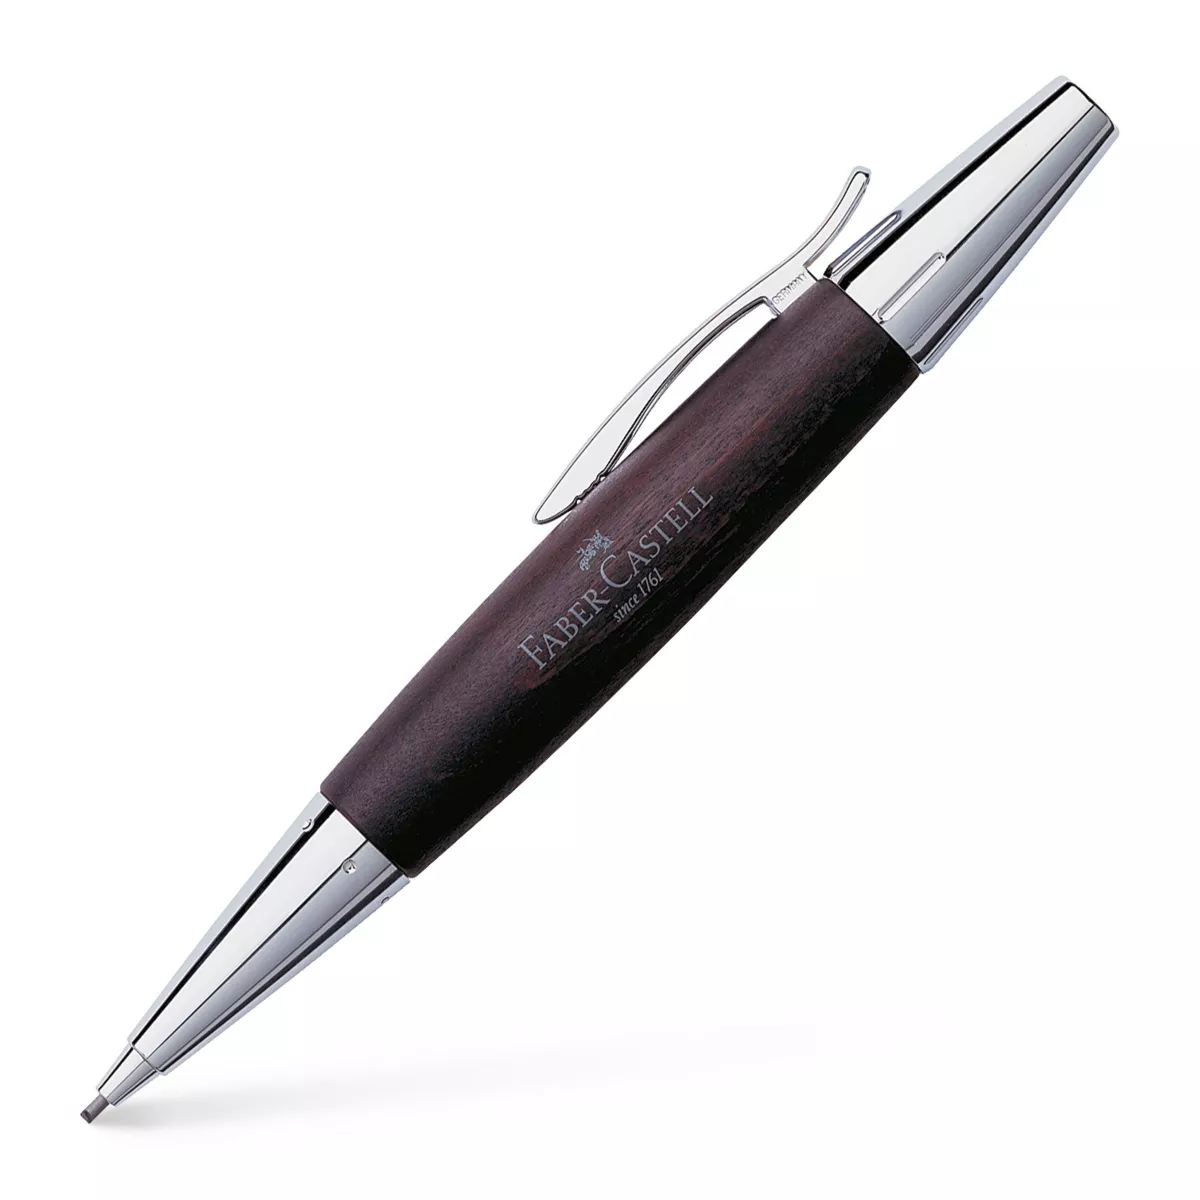 CREION MECANIC 1.4 MM E-MOTION PEARWOOD/MARO INCHIS FABER-CASTELL